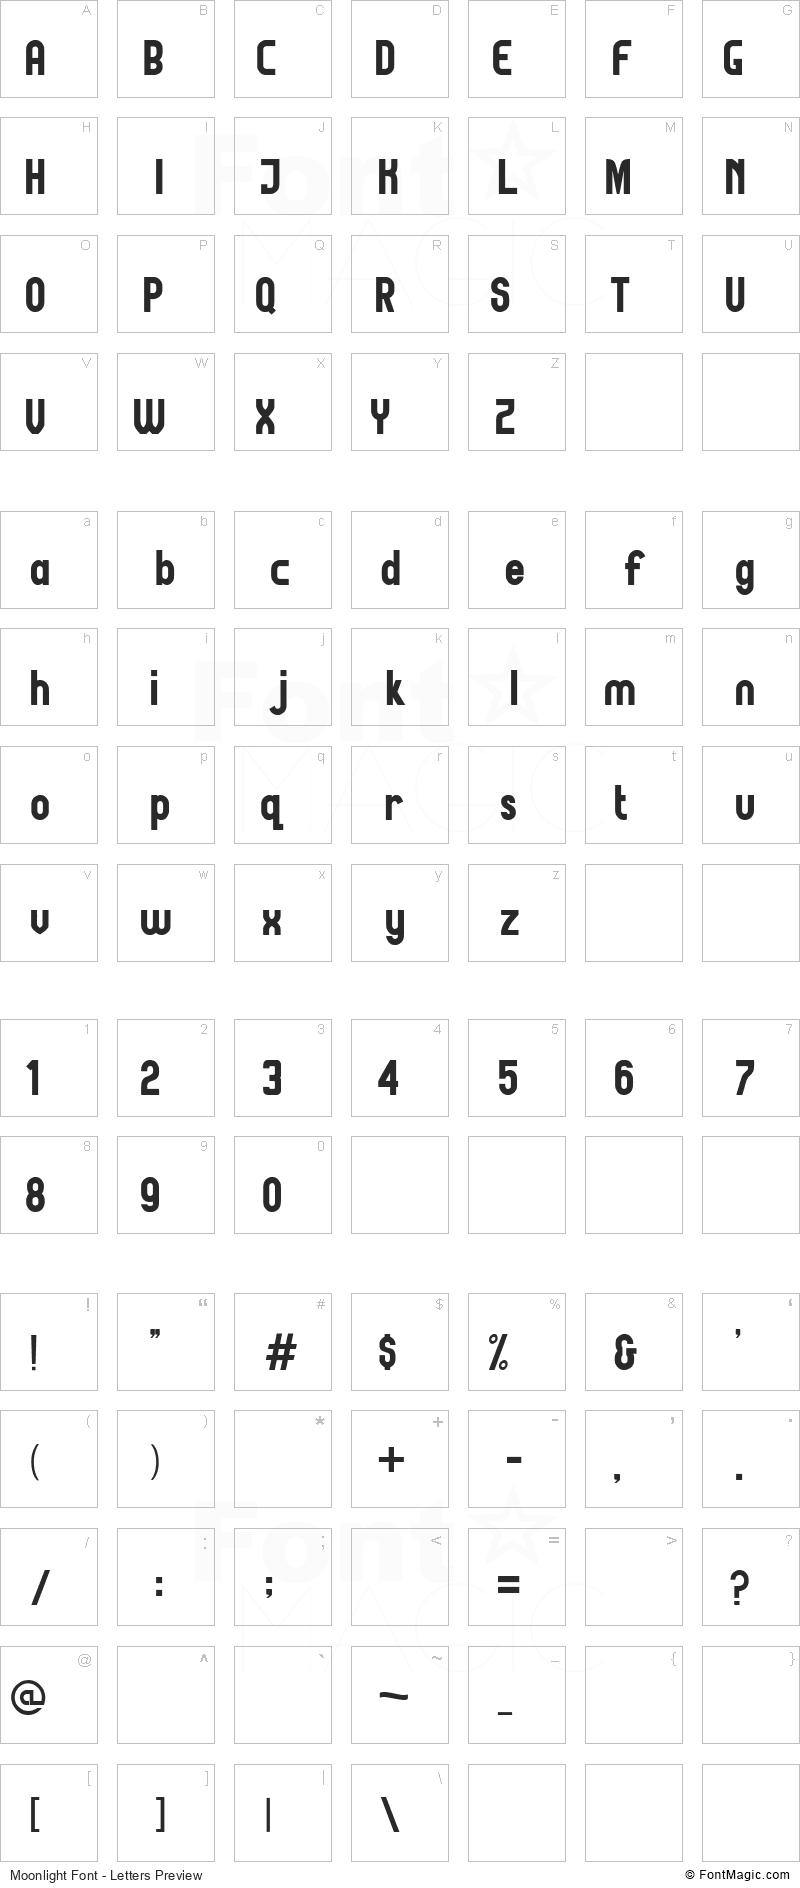 Moonlight Font - All Latters Preview Chart